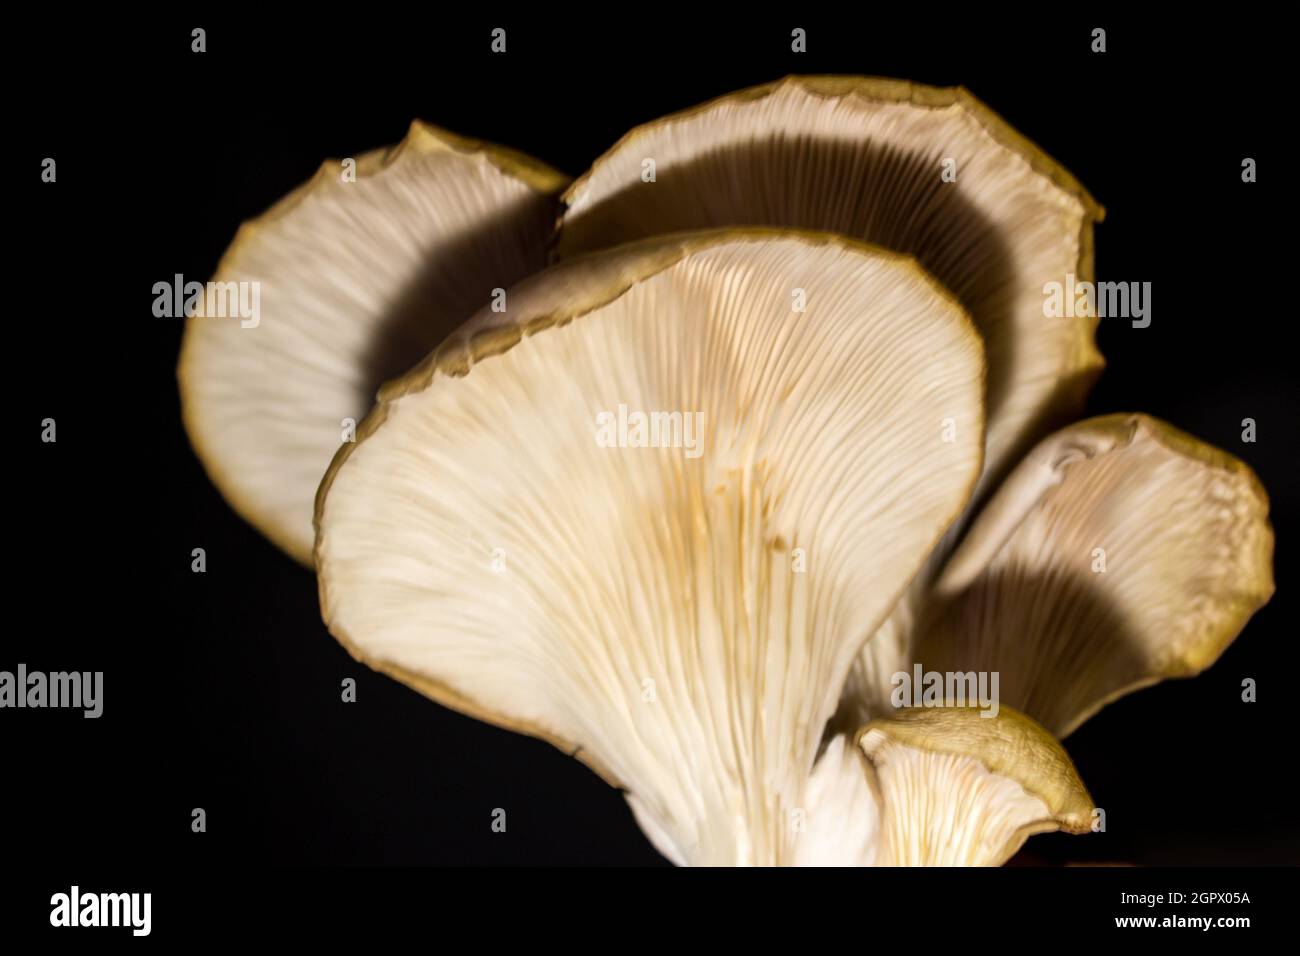 A cluster of Oyster Mushrooms, Pleurotus Ostreatus, as seen from below against a black background Stock Photo